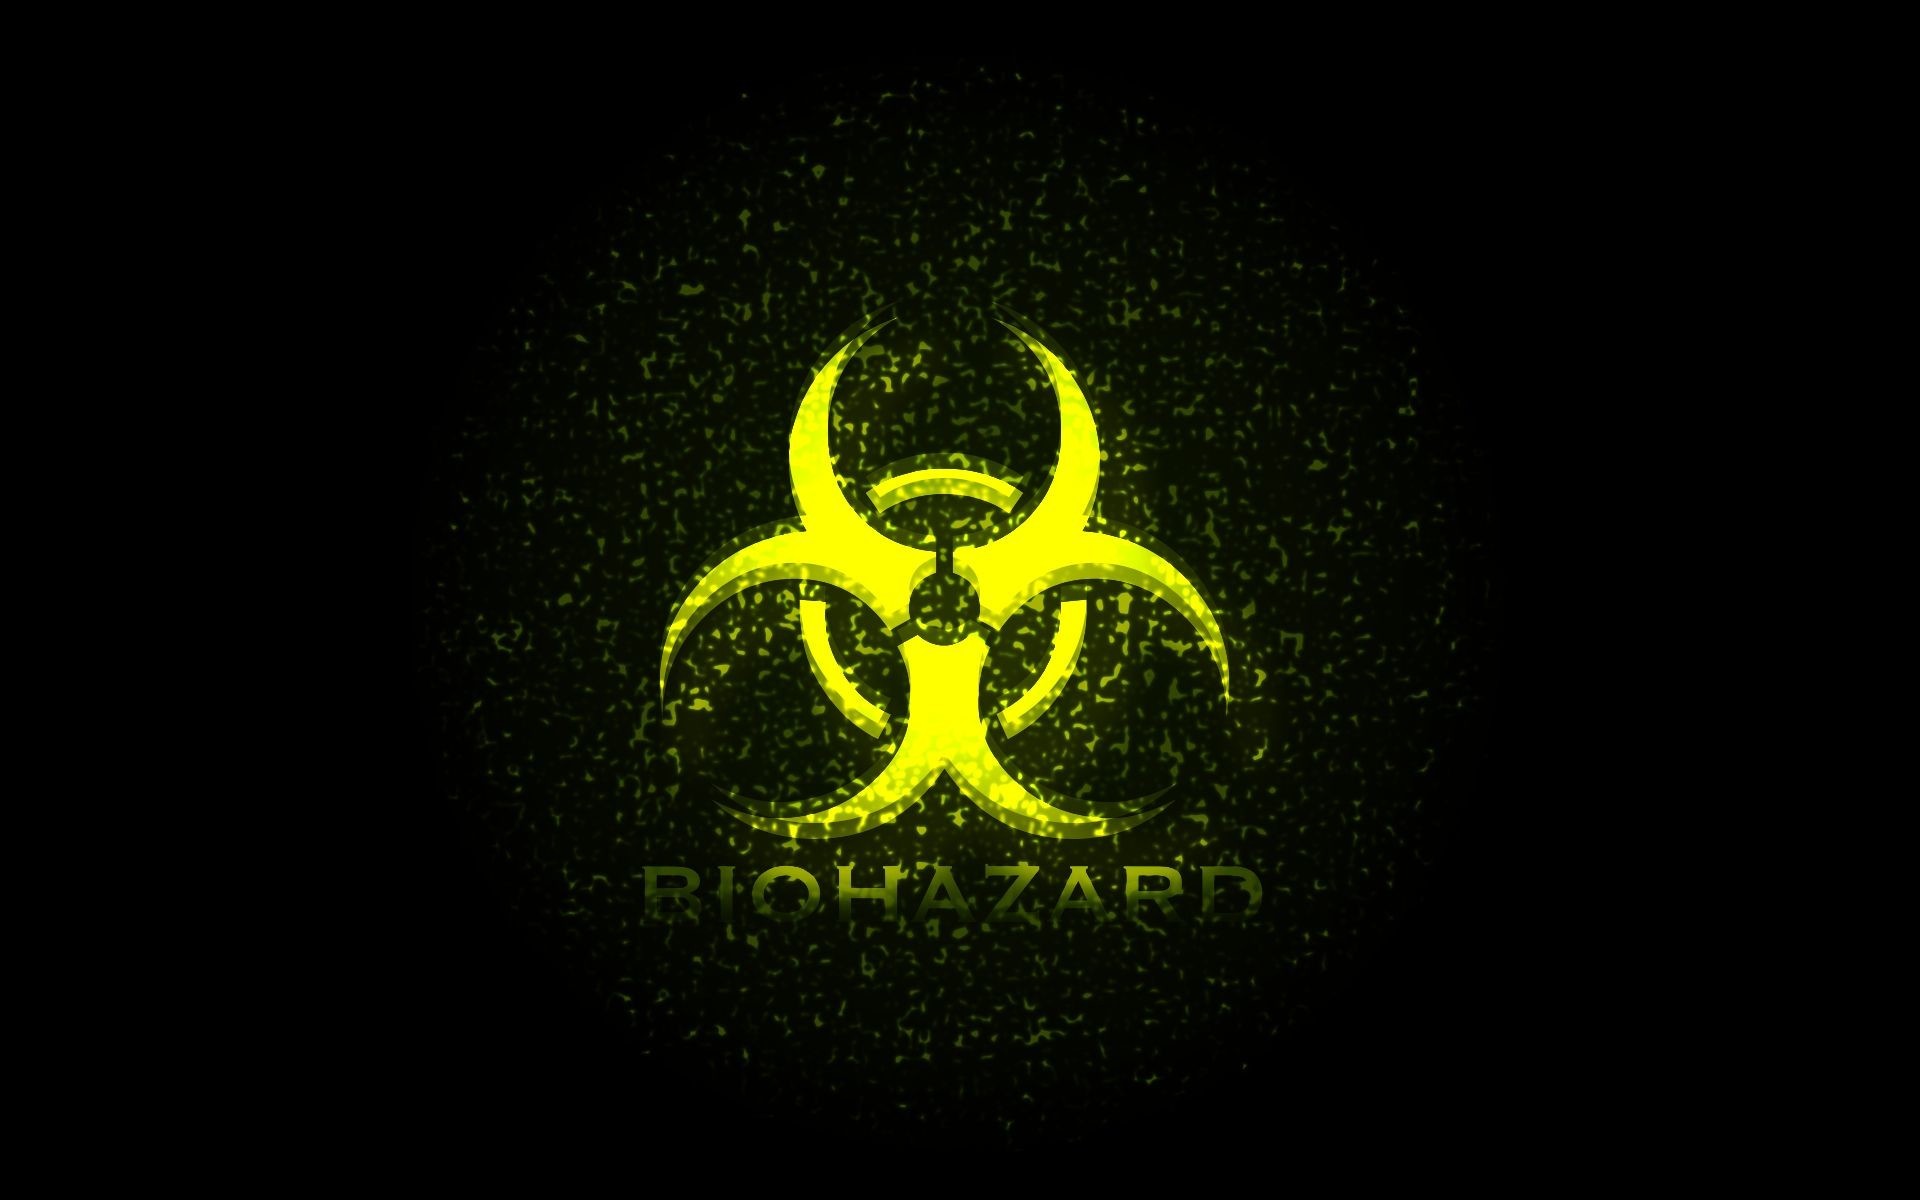 1920x1200  Biohazard Symbol, HD Widescreen Wallpapers For Free